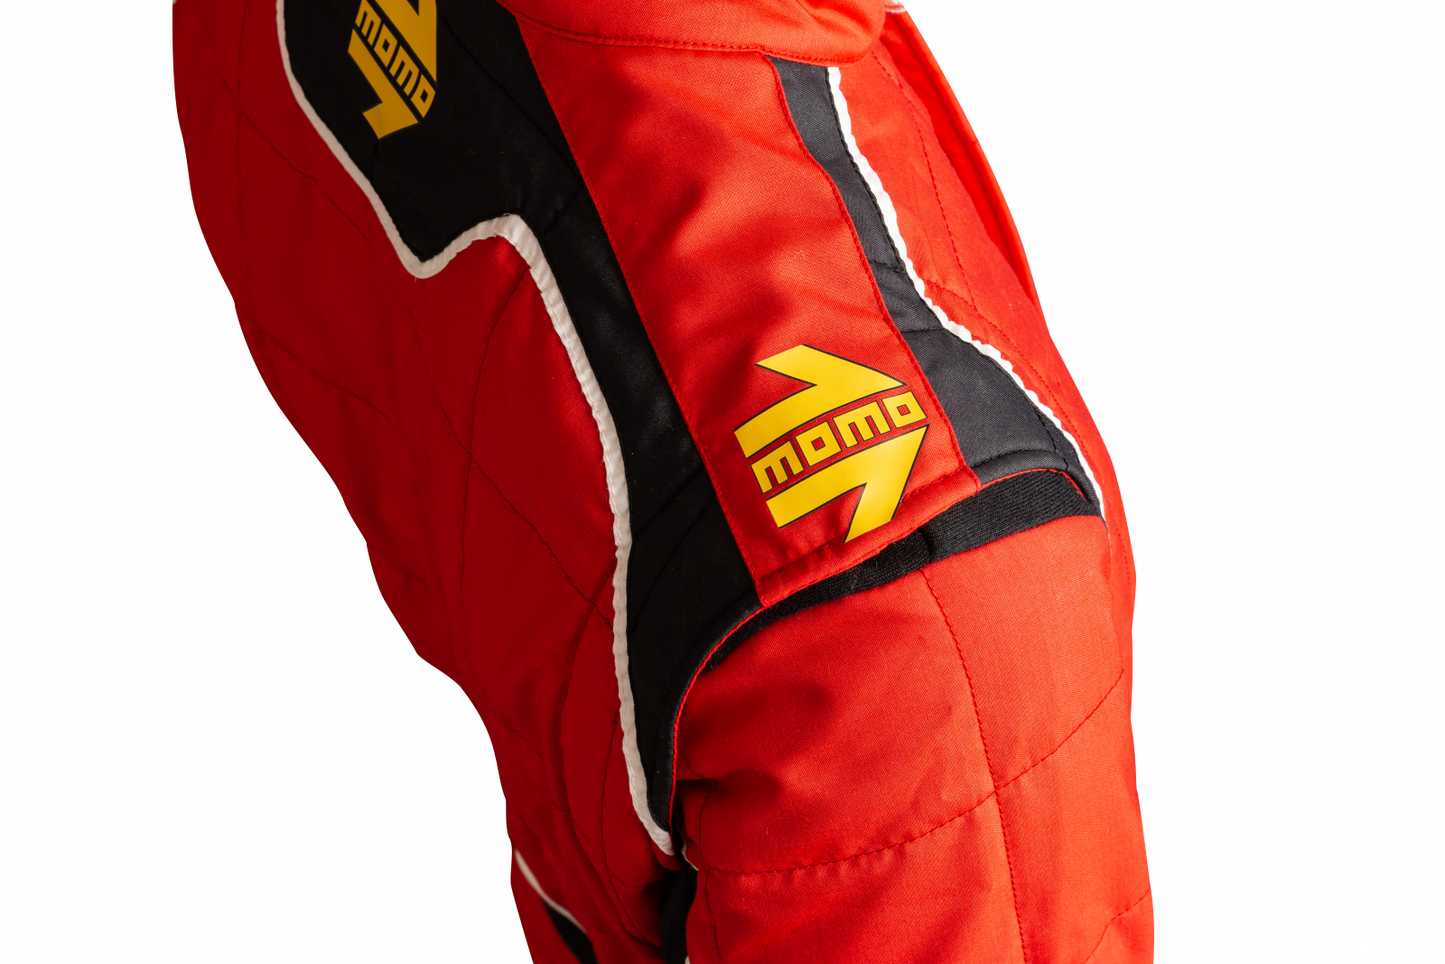 MOMO Corsa Evo Red Size 58 Racing Suit TUCOEVORED58